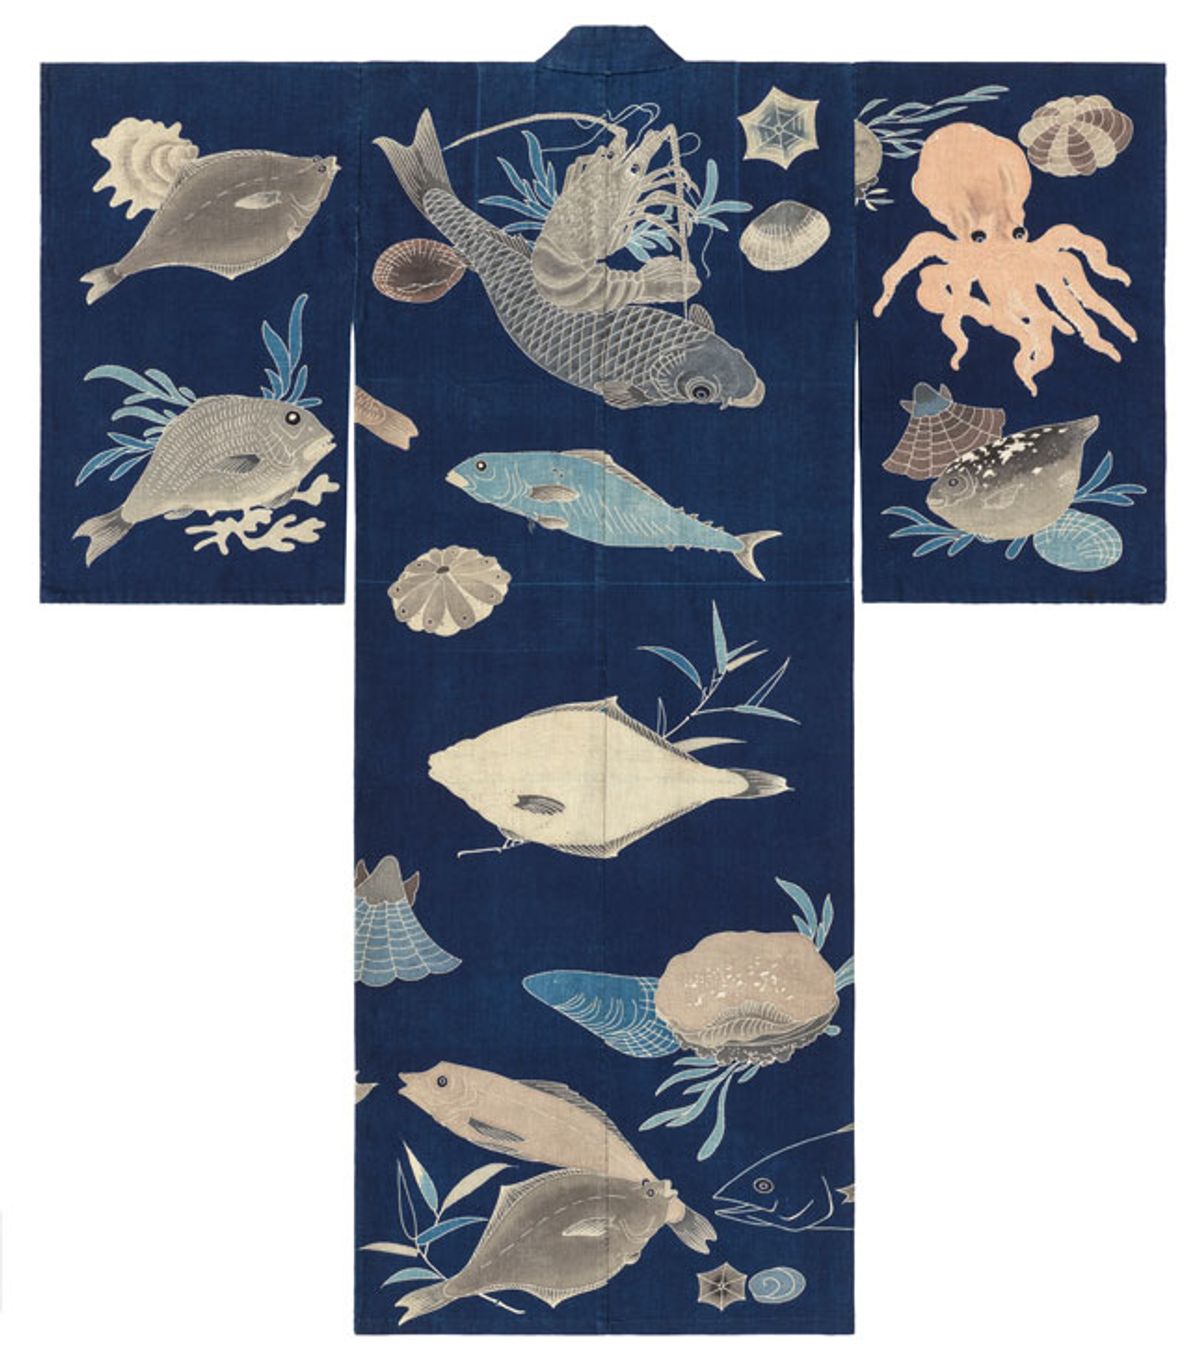 A 20th century festival kimono decorated with sea creatures John R. Van Derlip Fund and the Mary Griggs Burke Endowment Fund; purchase from the Thomas Murray Collection